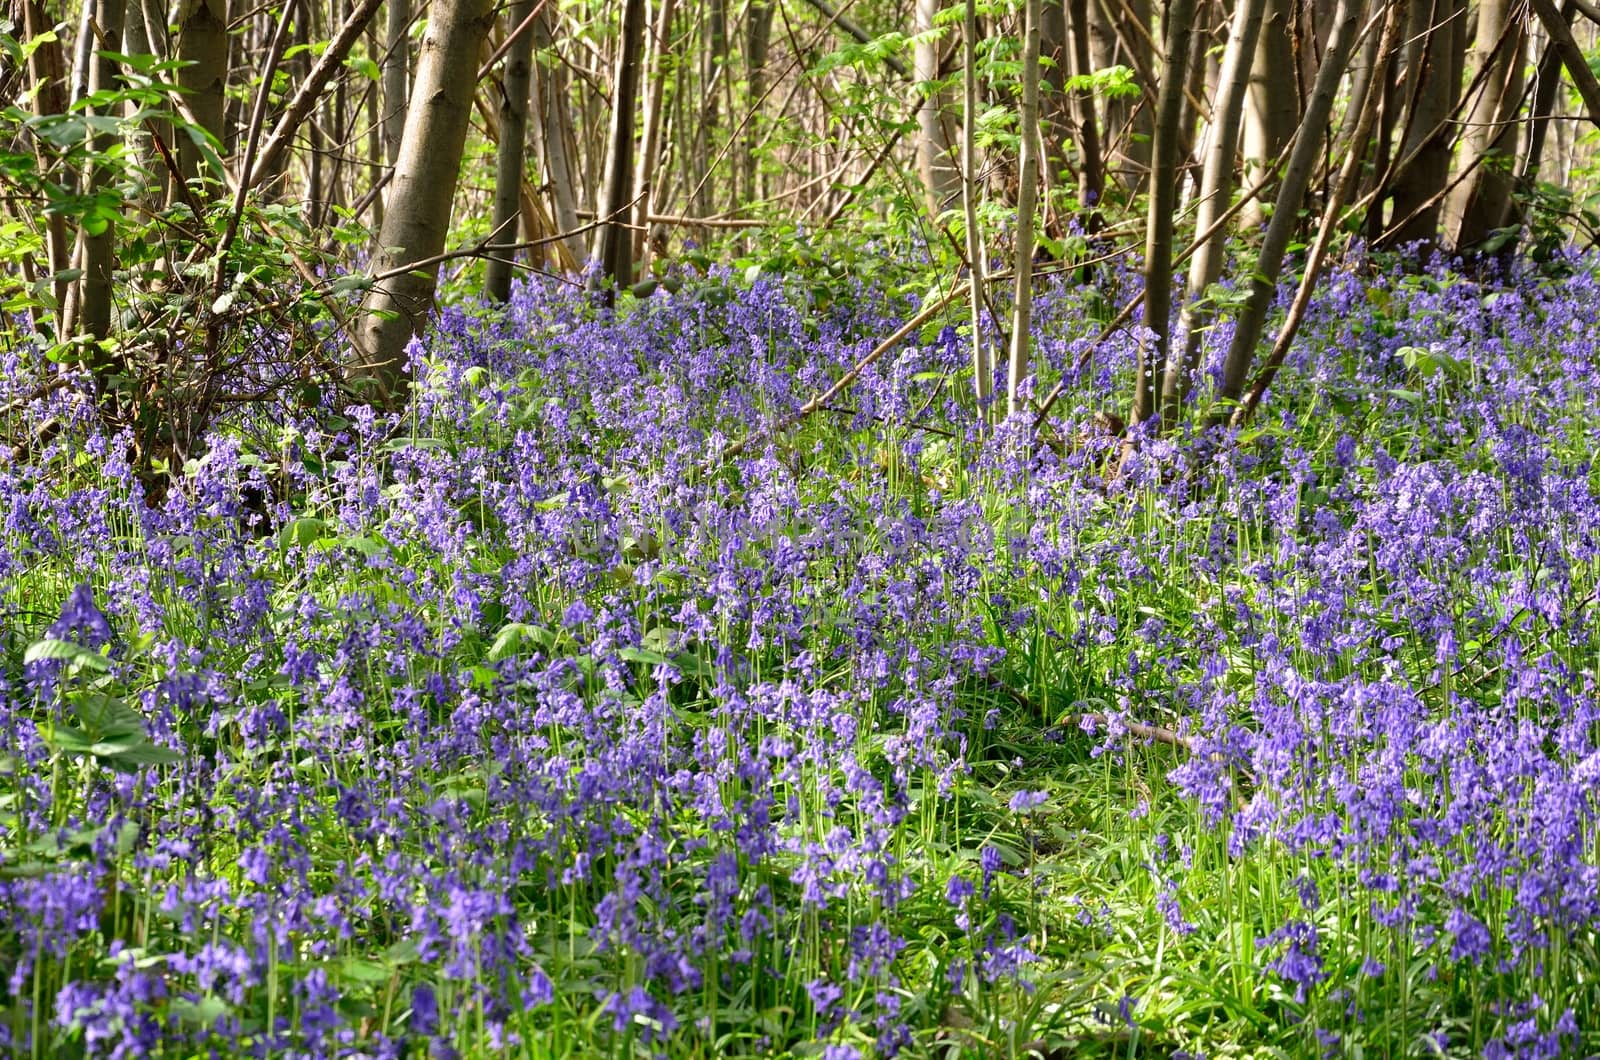 Large group of bluebells in forest by pauws99